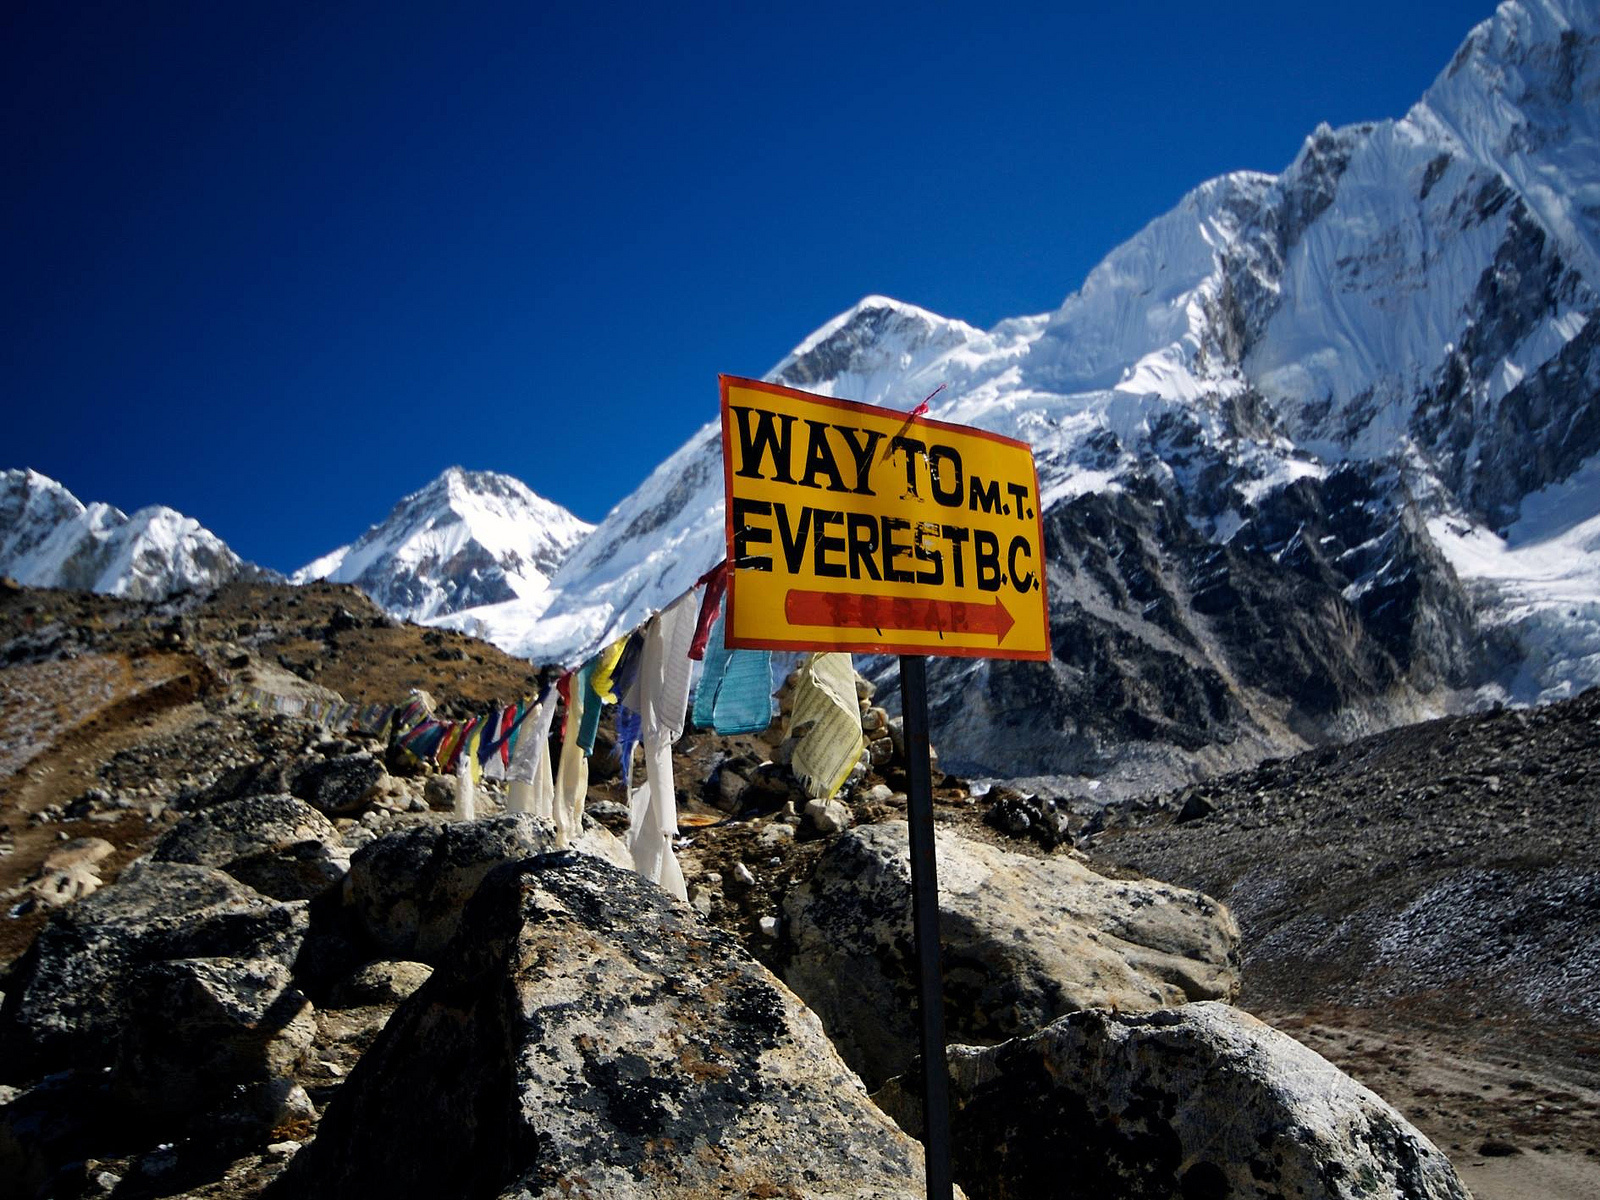 By now, the Mount Everest has claimed the lives of more than 200 climbers.